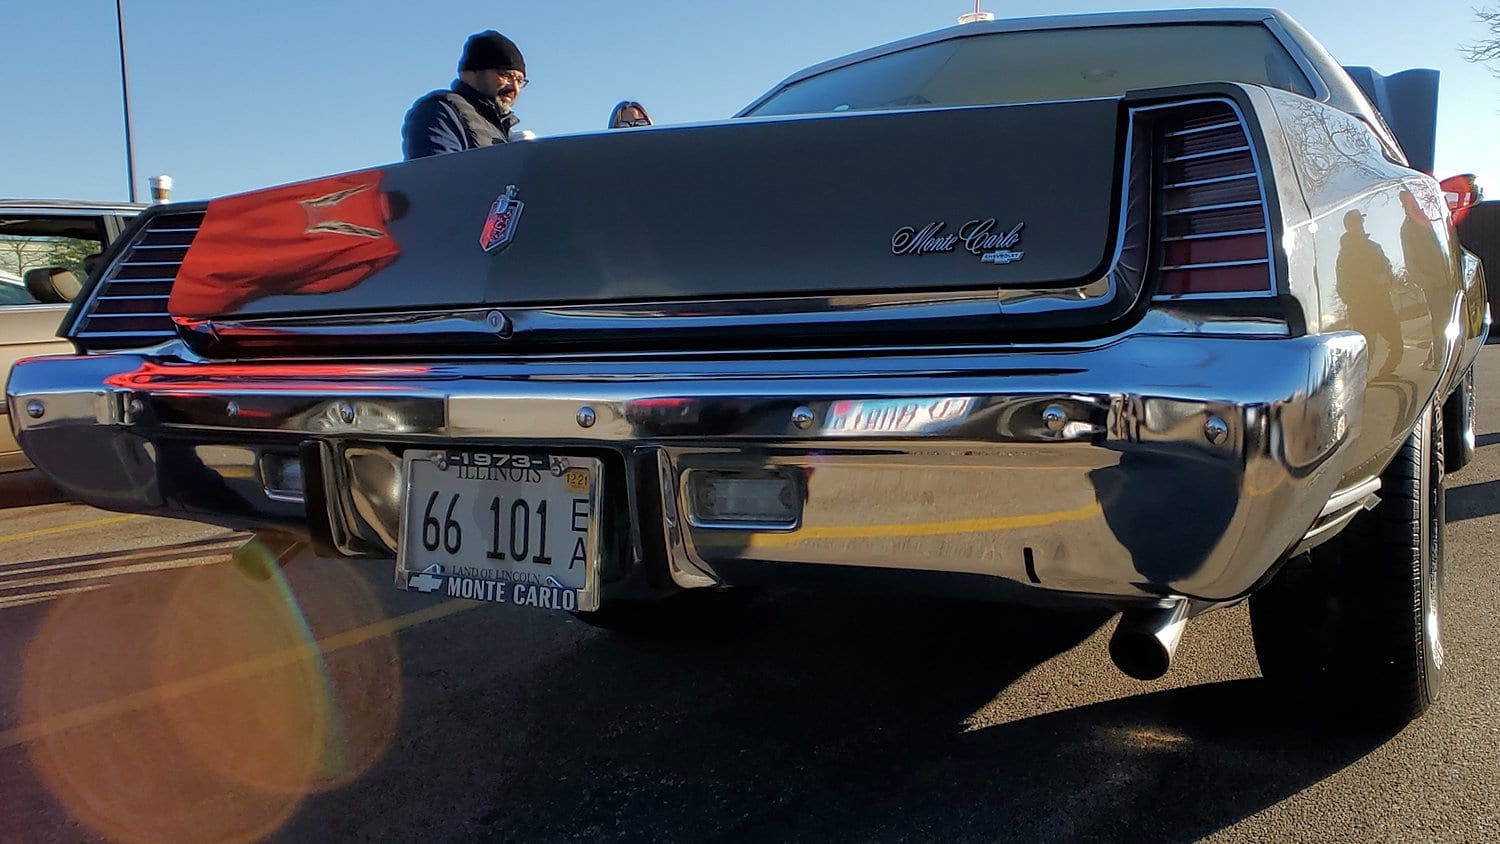 Tail end of 1973 Chevrolet Monte Carlo.